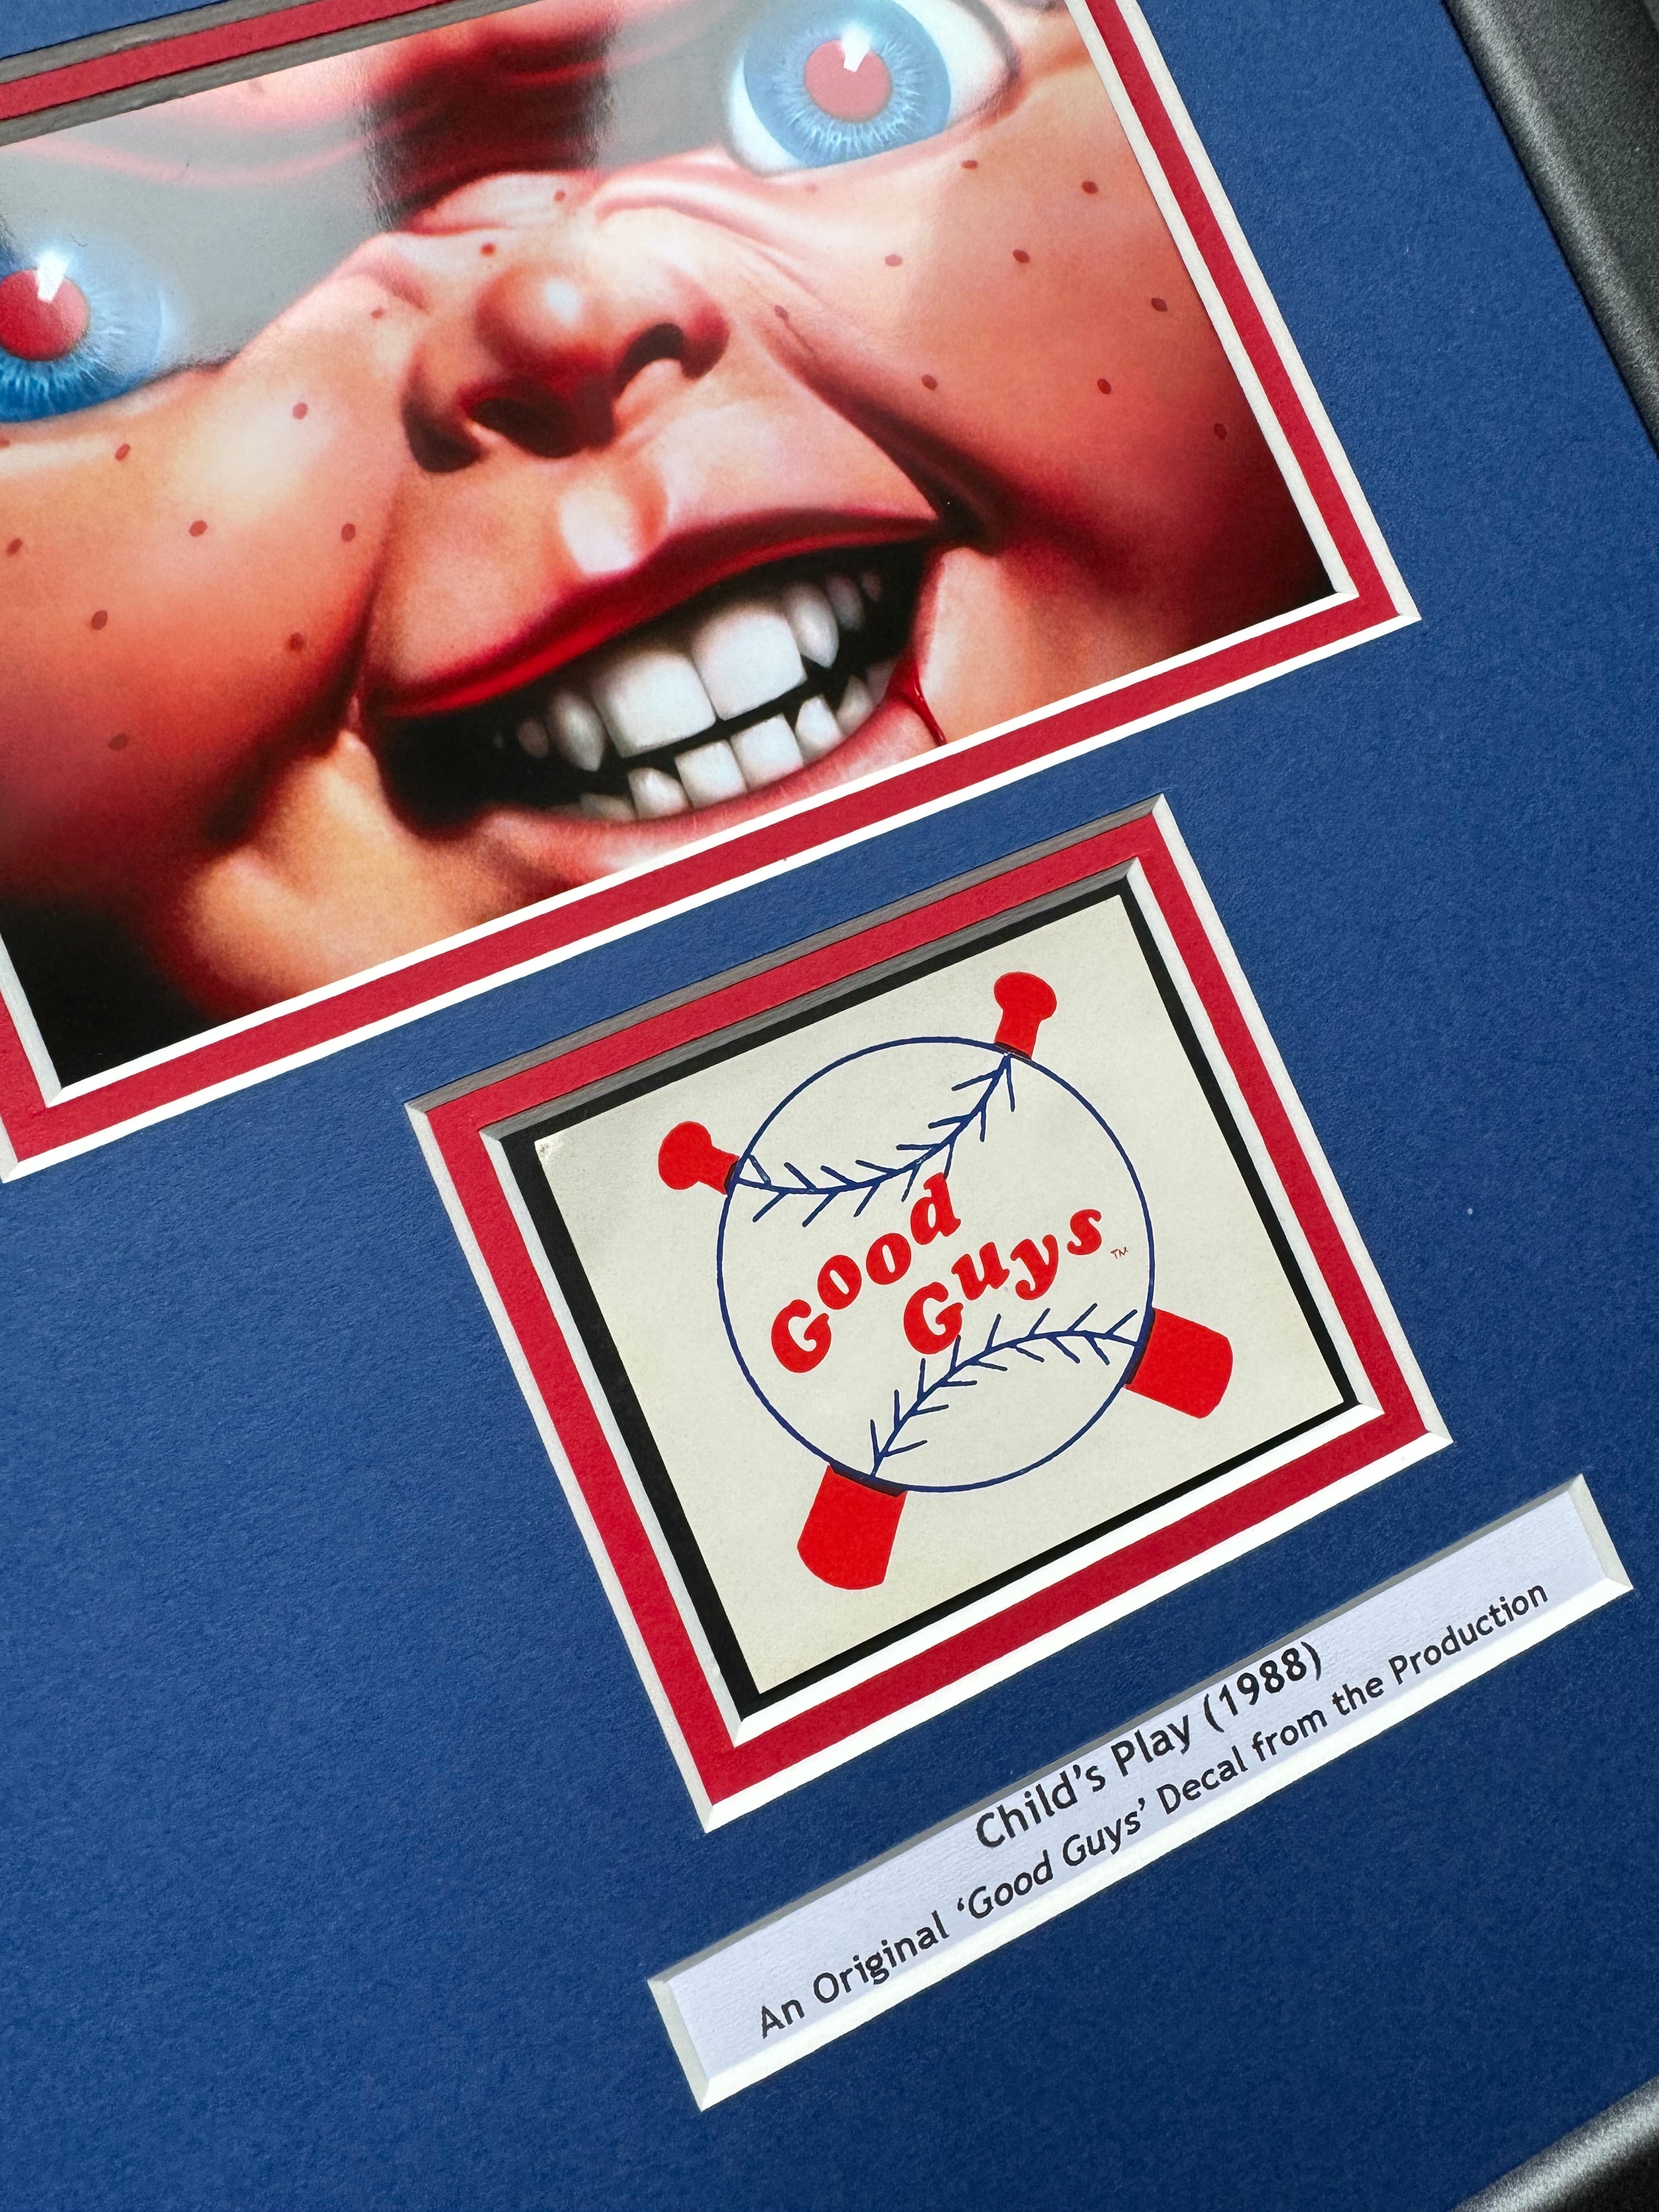 Child’s Play (1988) - A ‘Good Guys’ Decal used in the Film